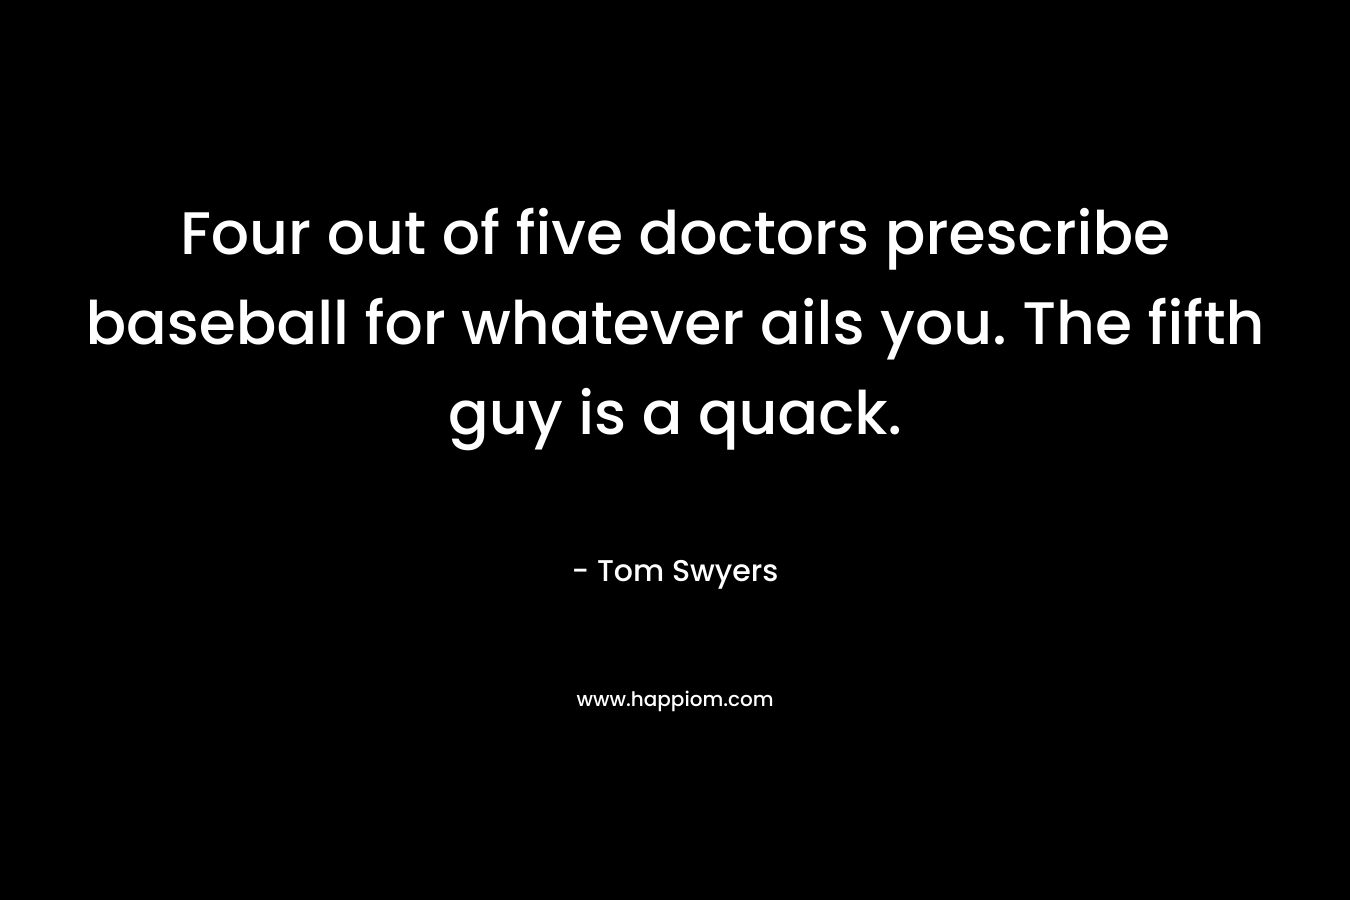 Four out of five doctors prescribe baseball for whatever ails you. The fifth guy is a quack.